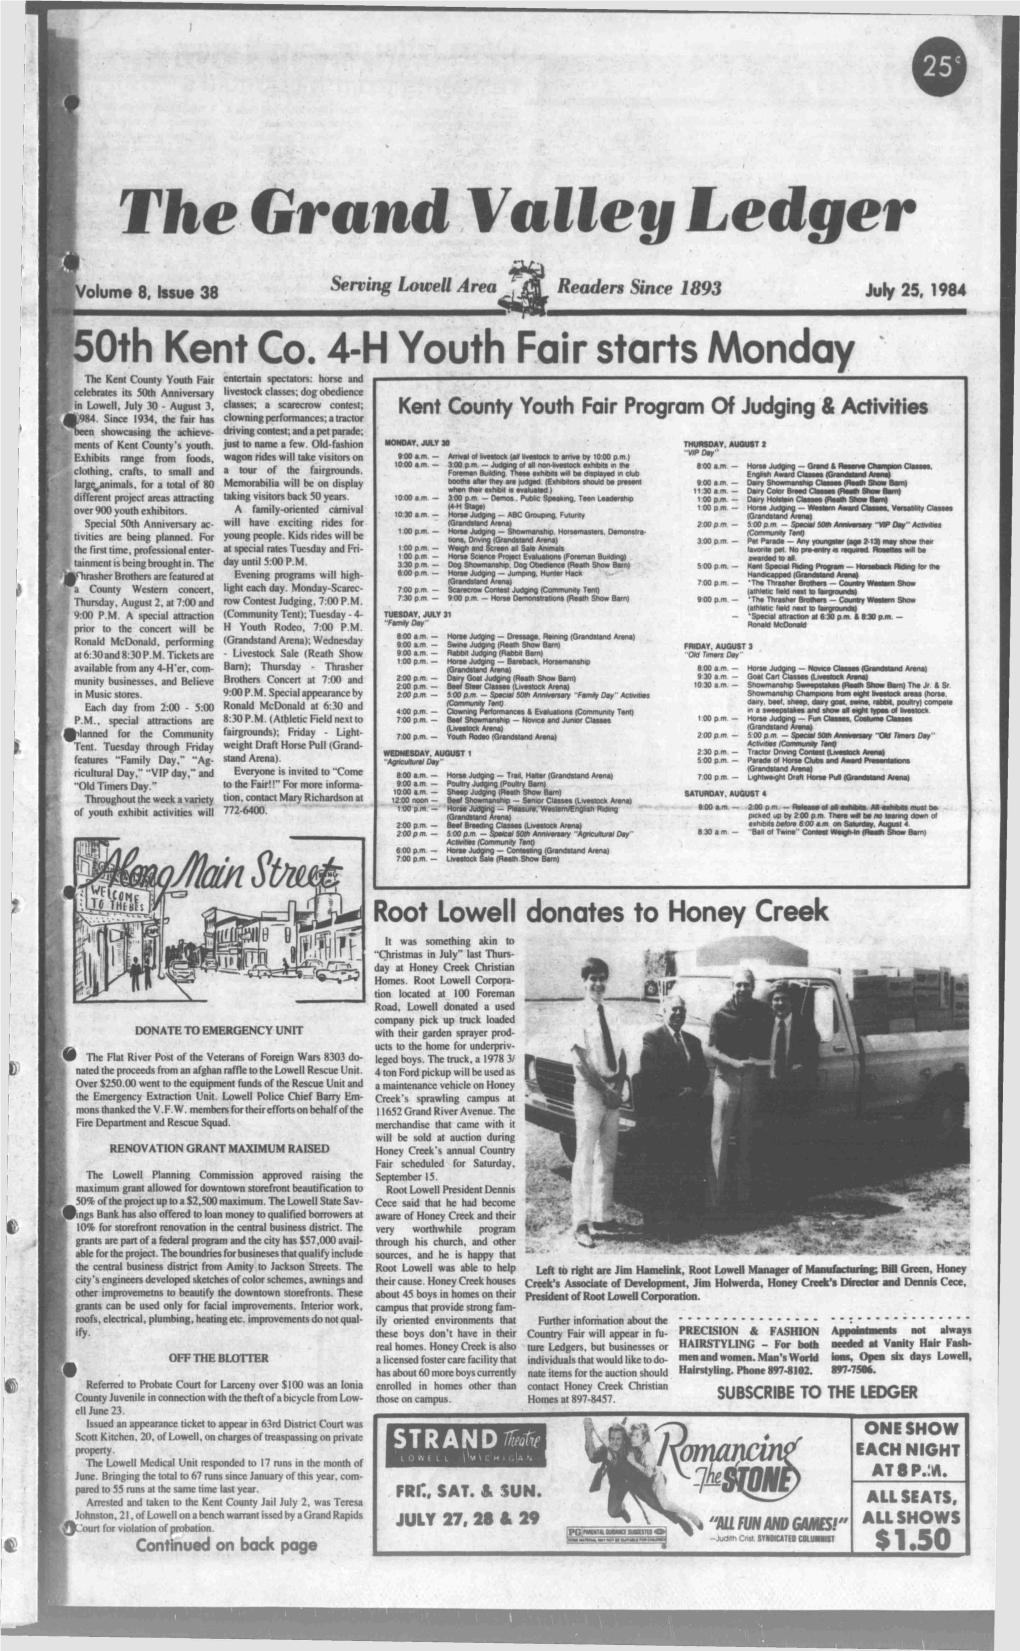 Oth Kent Co. 4-H Youth Fair Starts Monday